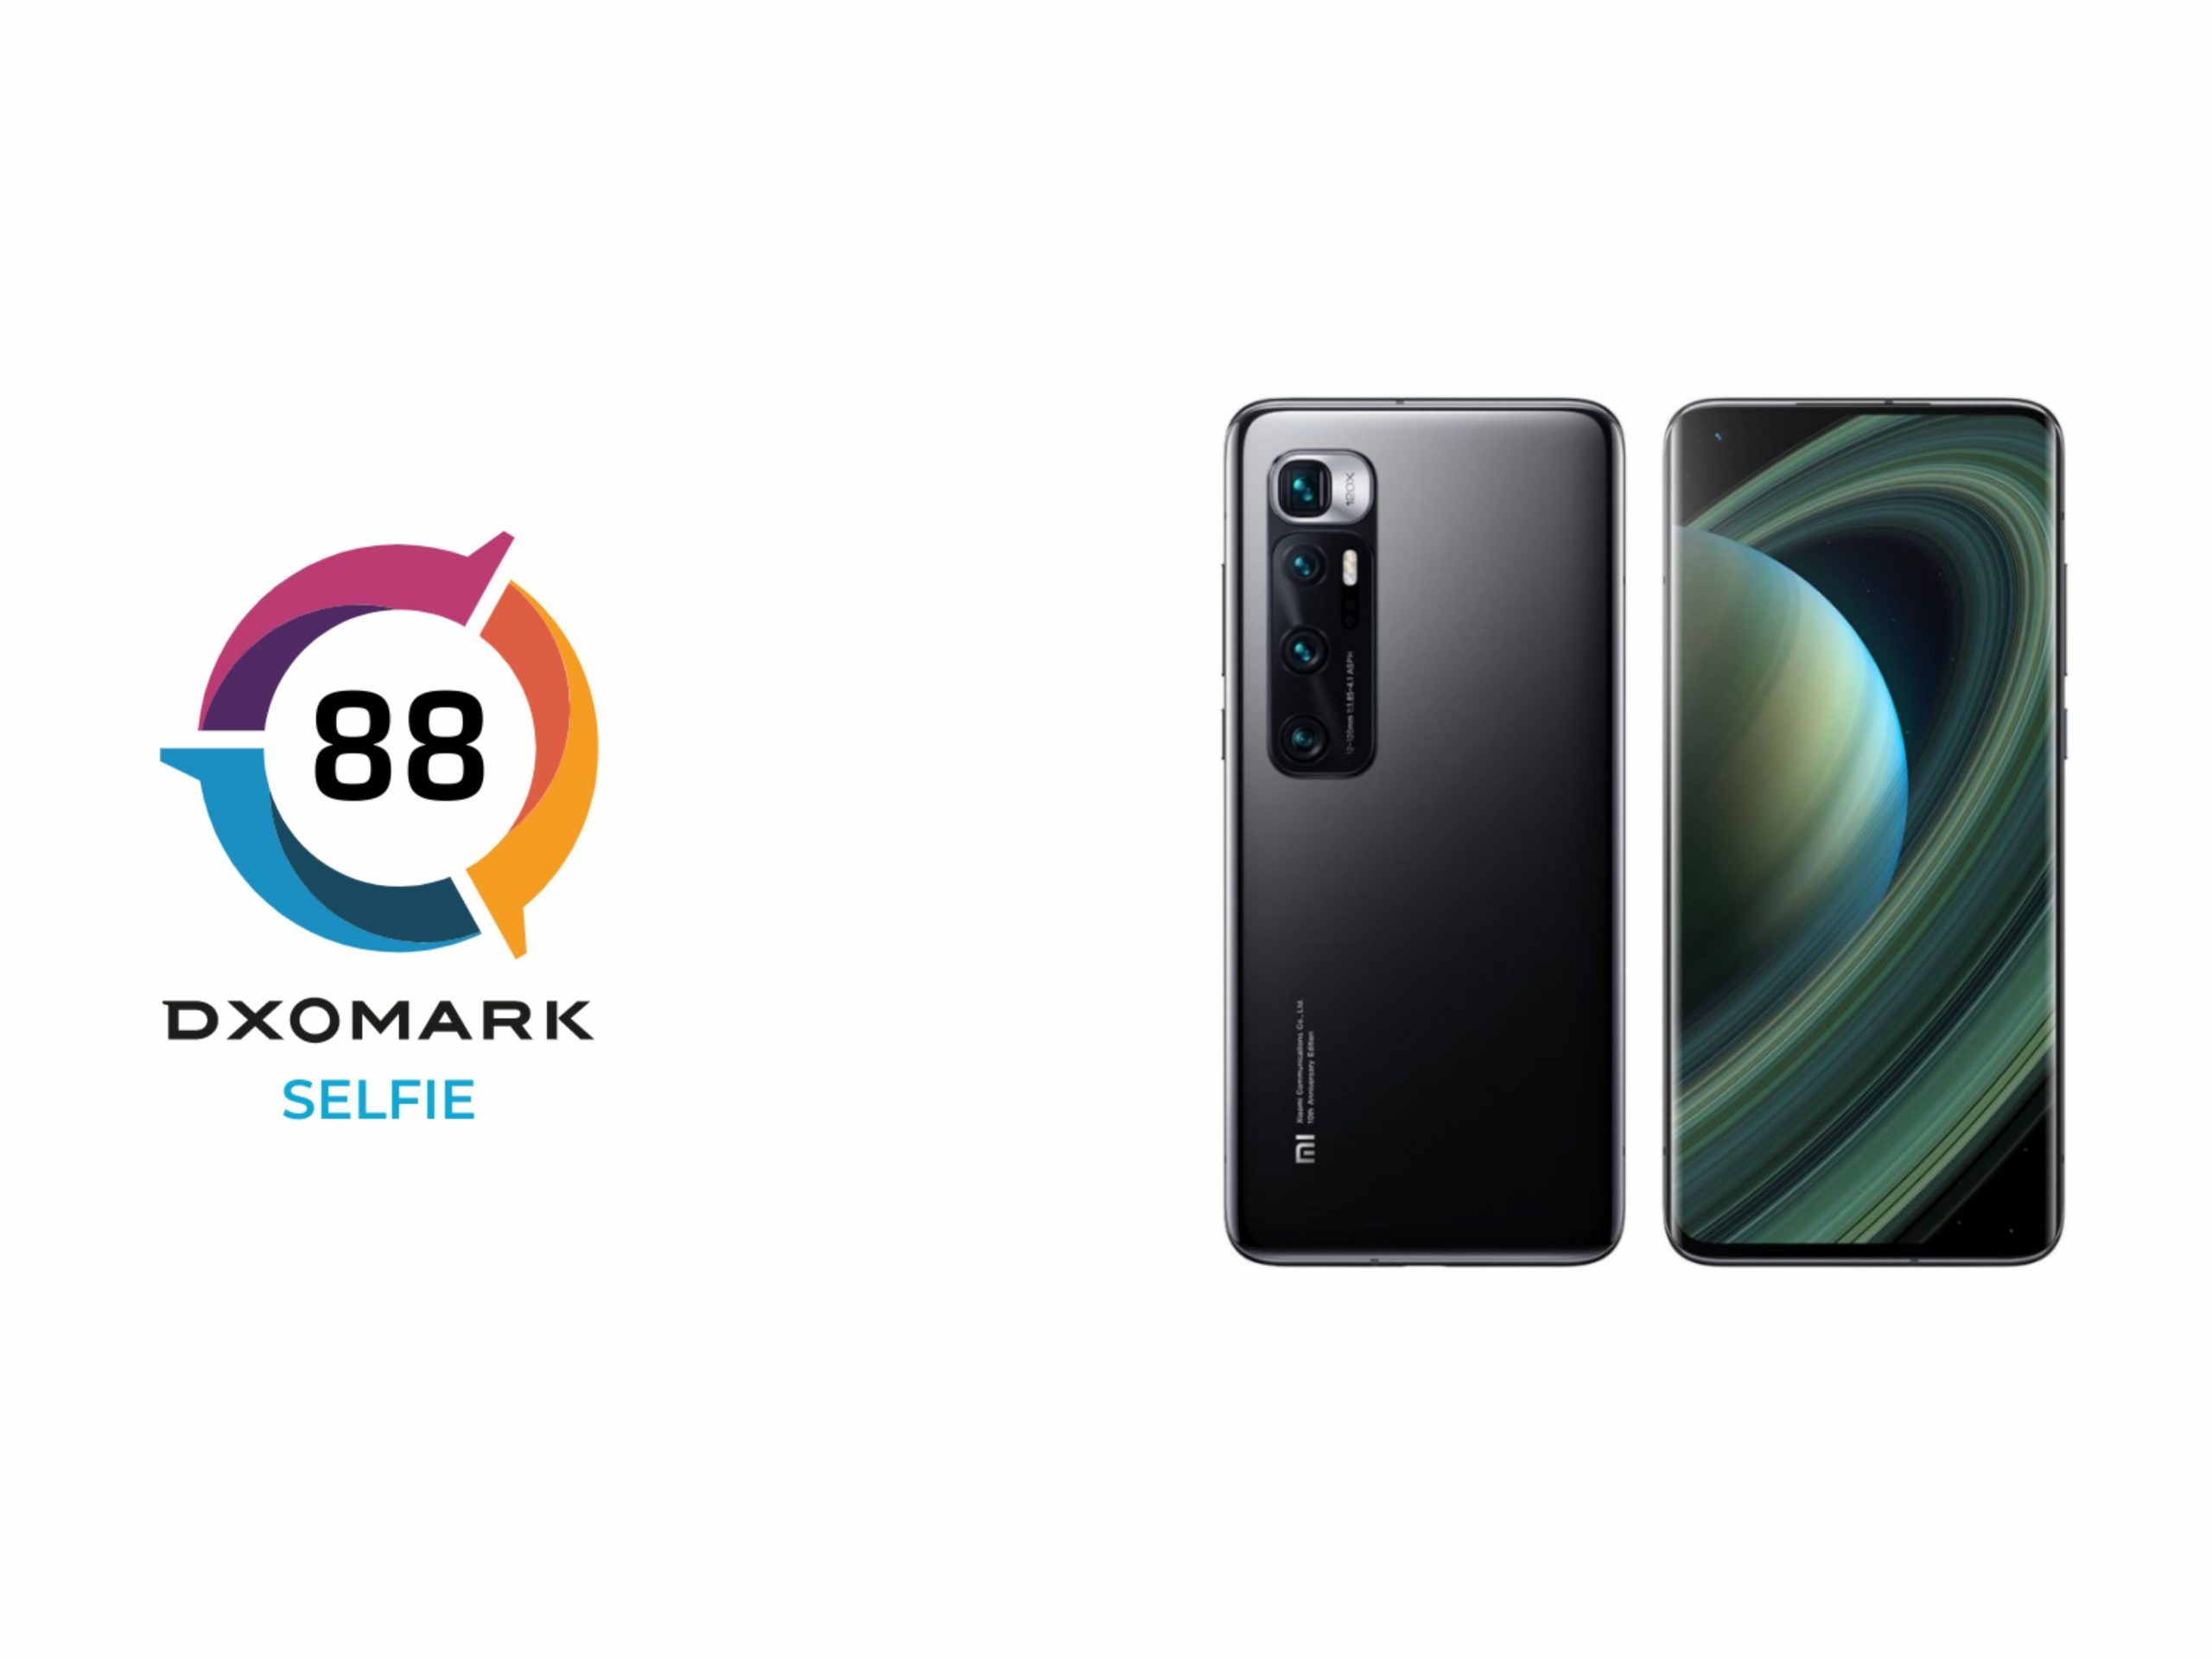 Mi 10 Ultra ranks distant 22nd in DXOMARK Selfie by scoring only 88 points